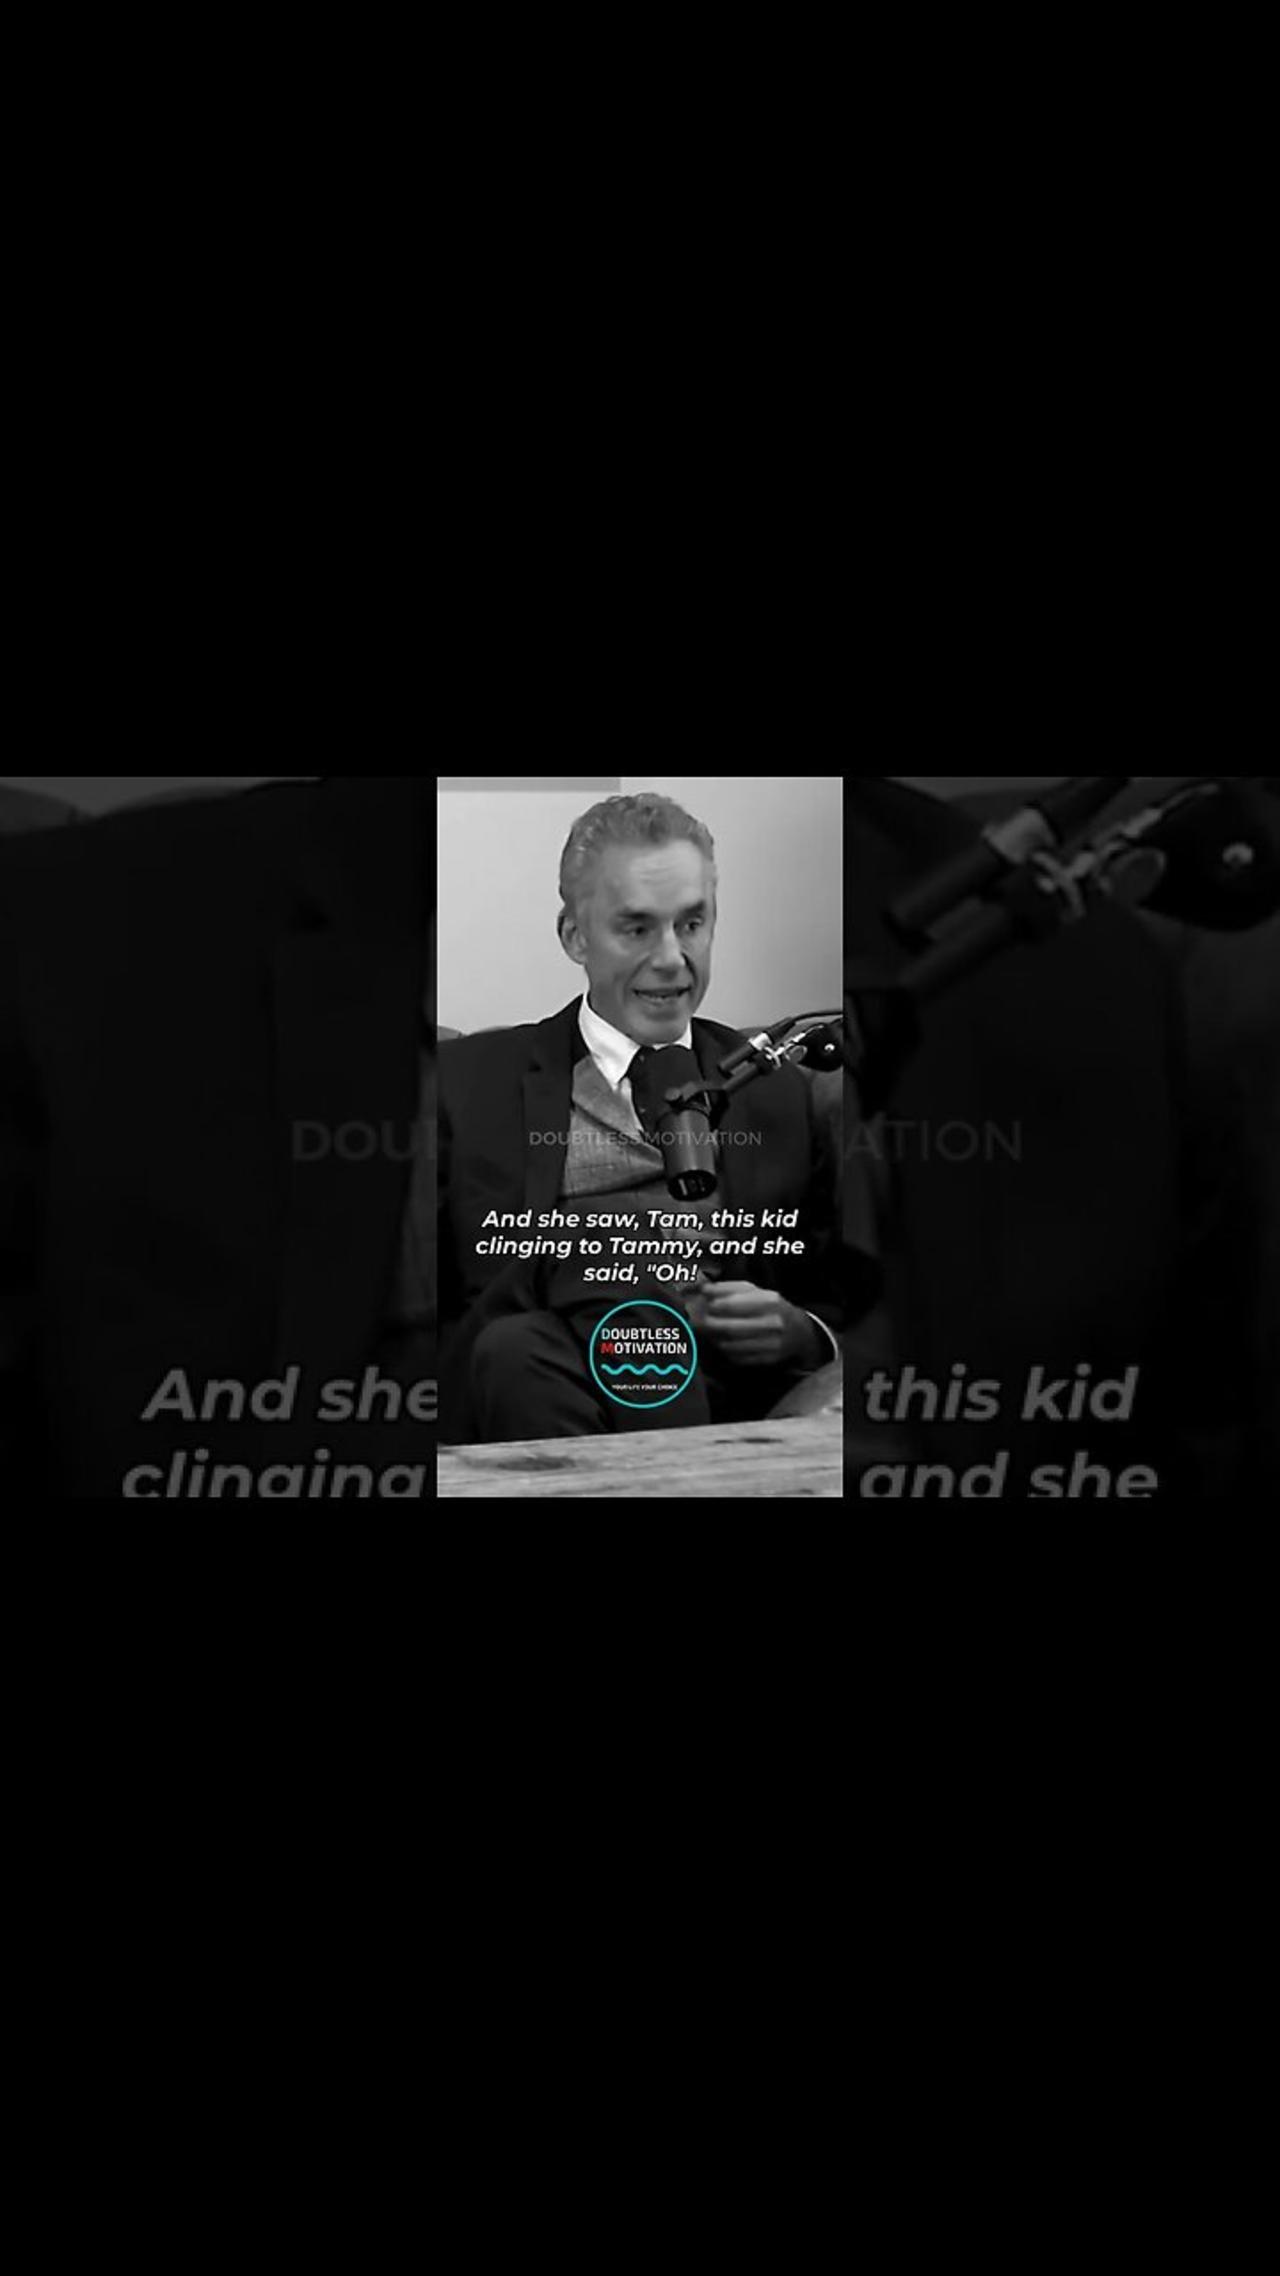 Don’t be a TOXIC MOM like this and TORTURE your CHILD! - Jordan Peterson shares TRUE STORY! #shorts